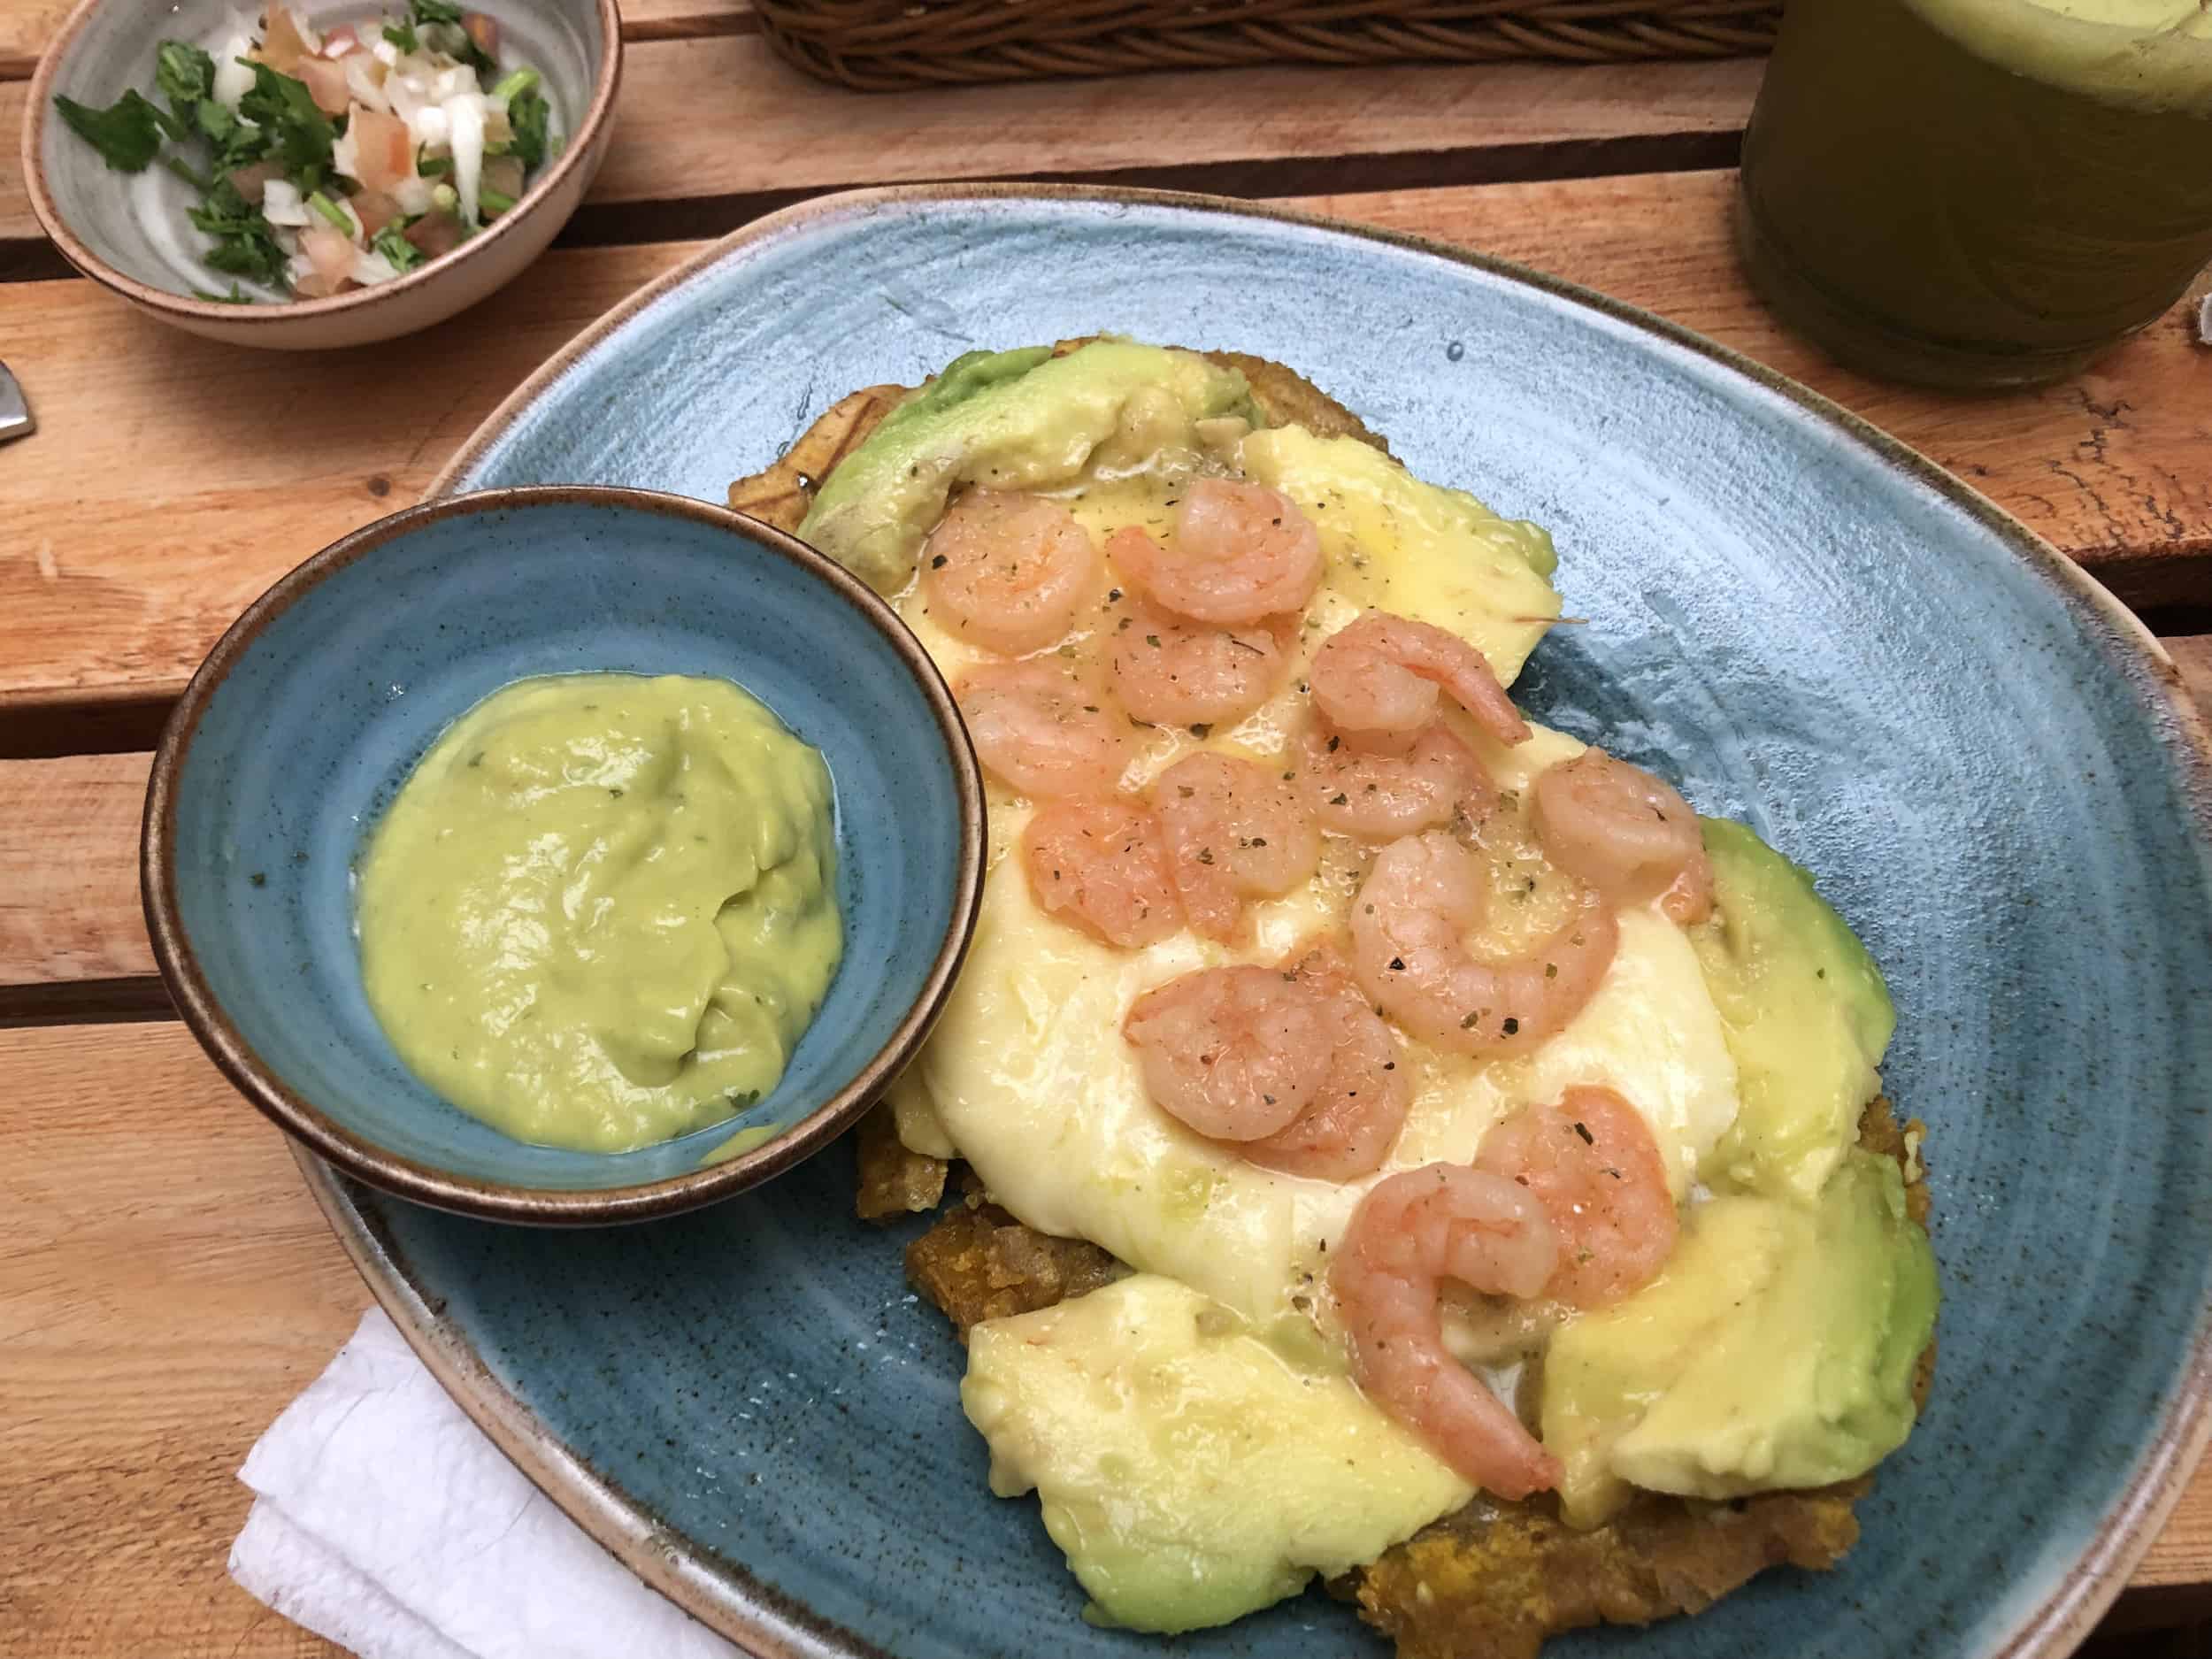 Patacón with shrimp, avocado, and melted cheese at Realismo Mágico in Jardín, Antioquia, Colombia